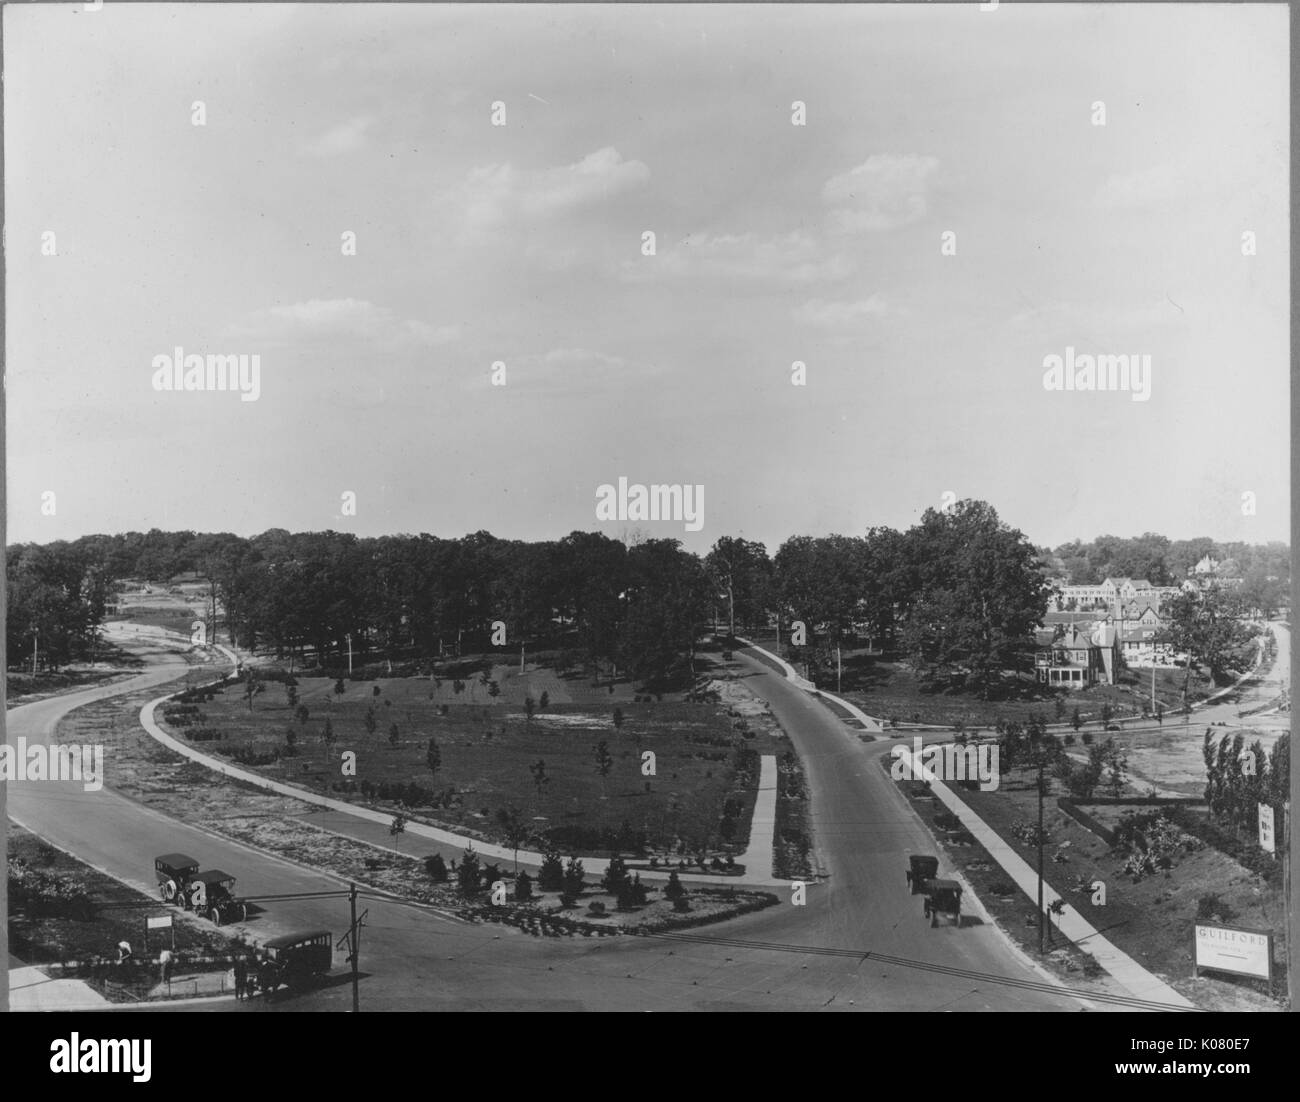 Aerial shot of two streets with sidewalks intersecting, with some cars depicted, trees in the background, Roland Park/Guilford, United States, 1910. This image is from a series documenting the construction and sale of homes in the Roland Park/Guilford neighborhood of Baltimore, a streetcar suburb and one of the first planned communities in the United States. Stock Photo